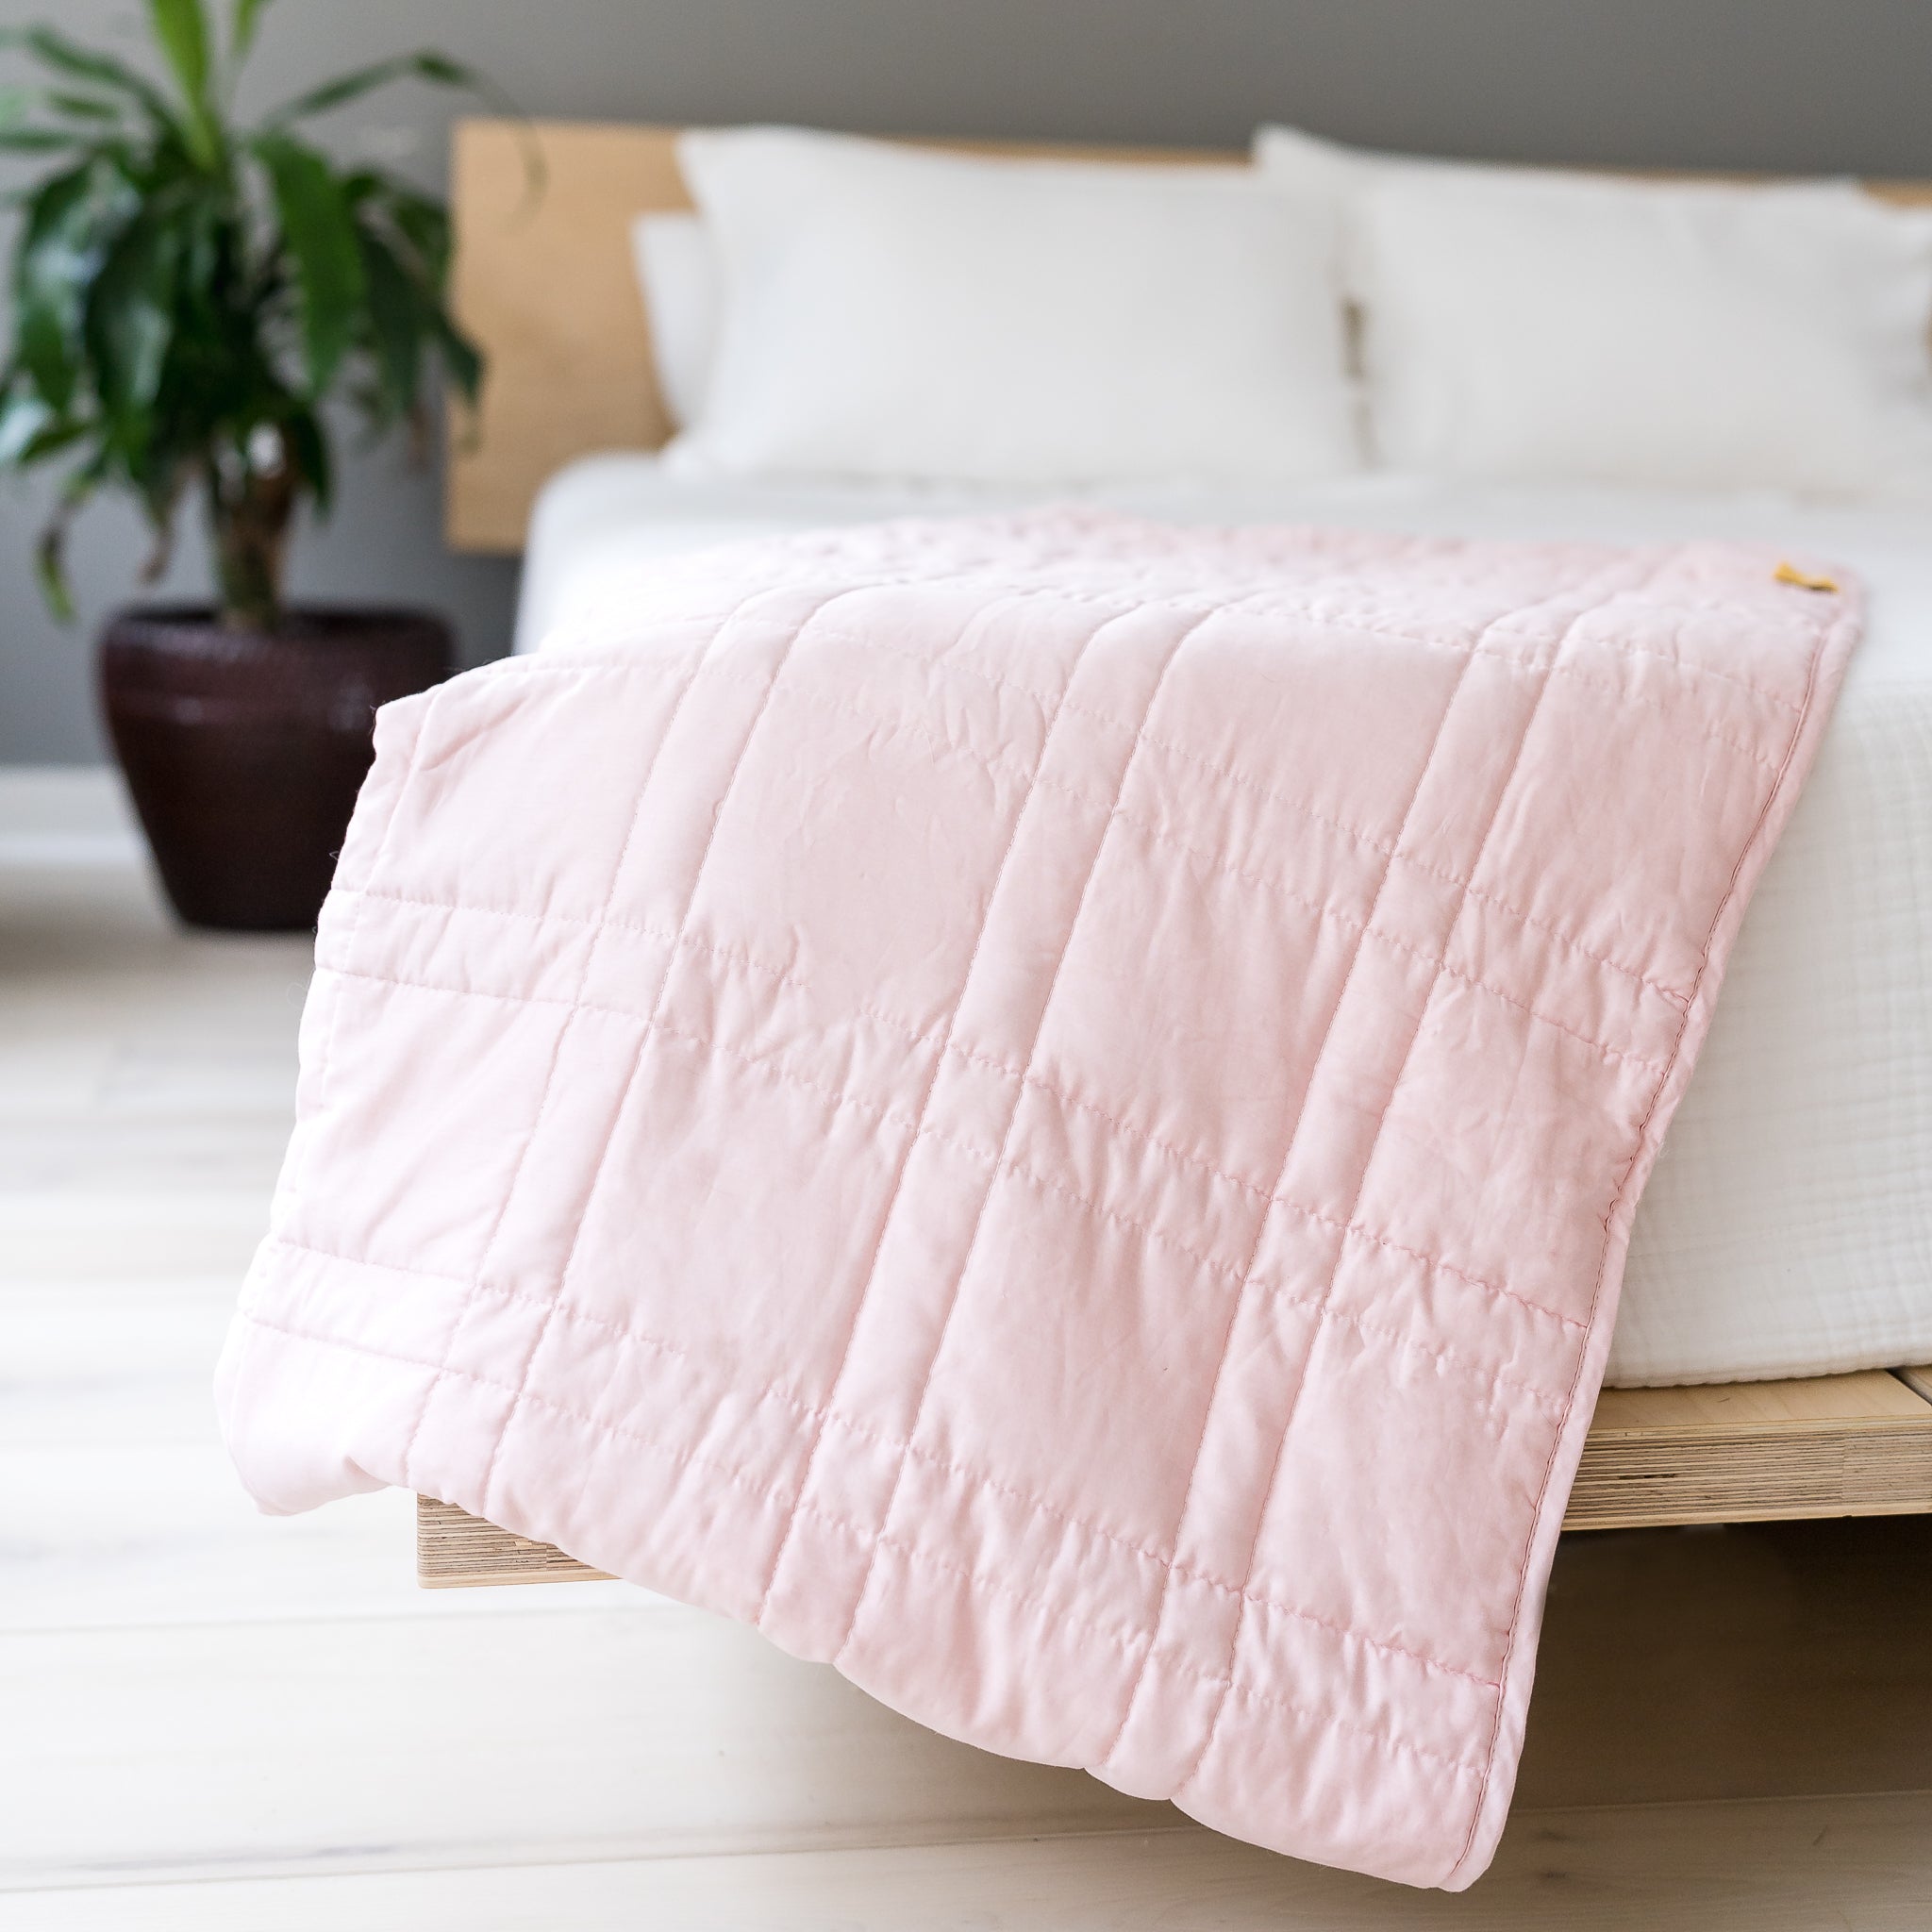 Cool Cotton Weighted Blanket • The Mini • 9lb